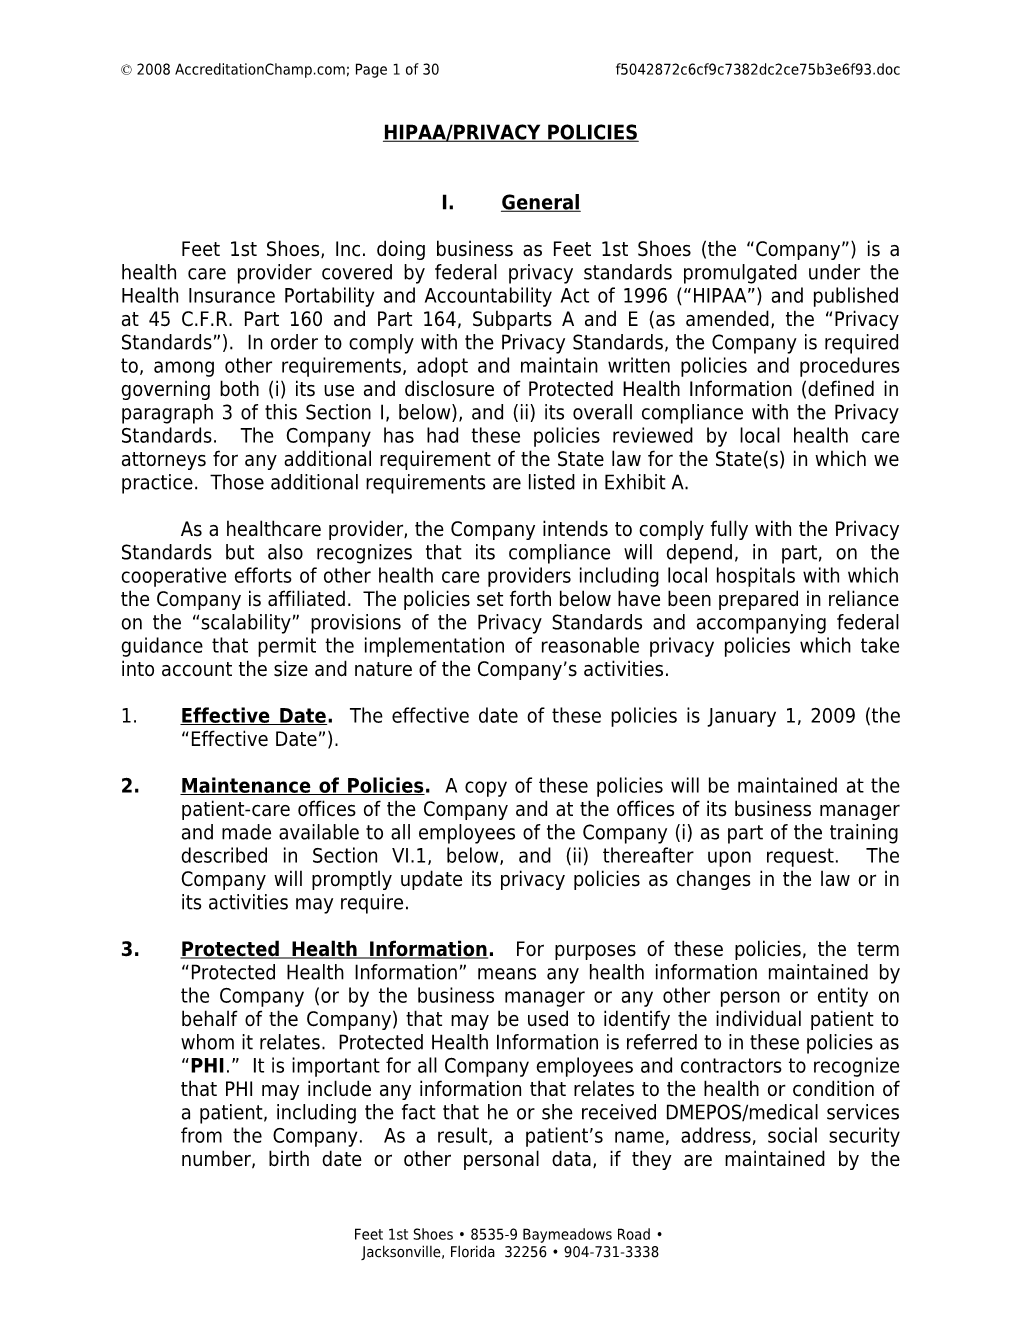 2008 Accreditationchamp.Com; Page 1 of 24 PDPM 01.60 Complete HIPAA Policy (Rev 4-08)